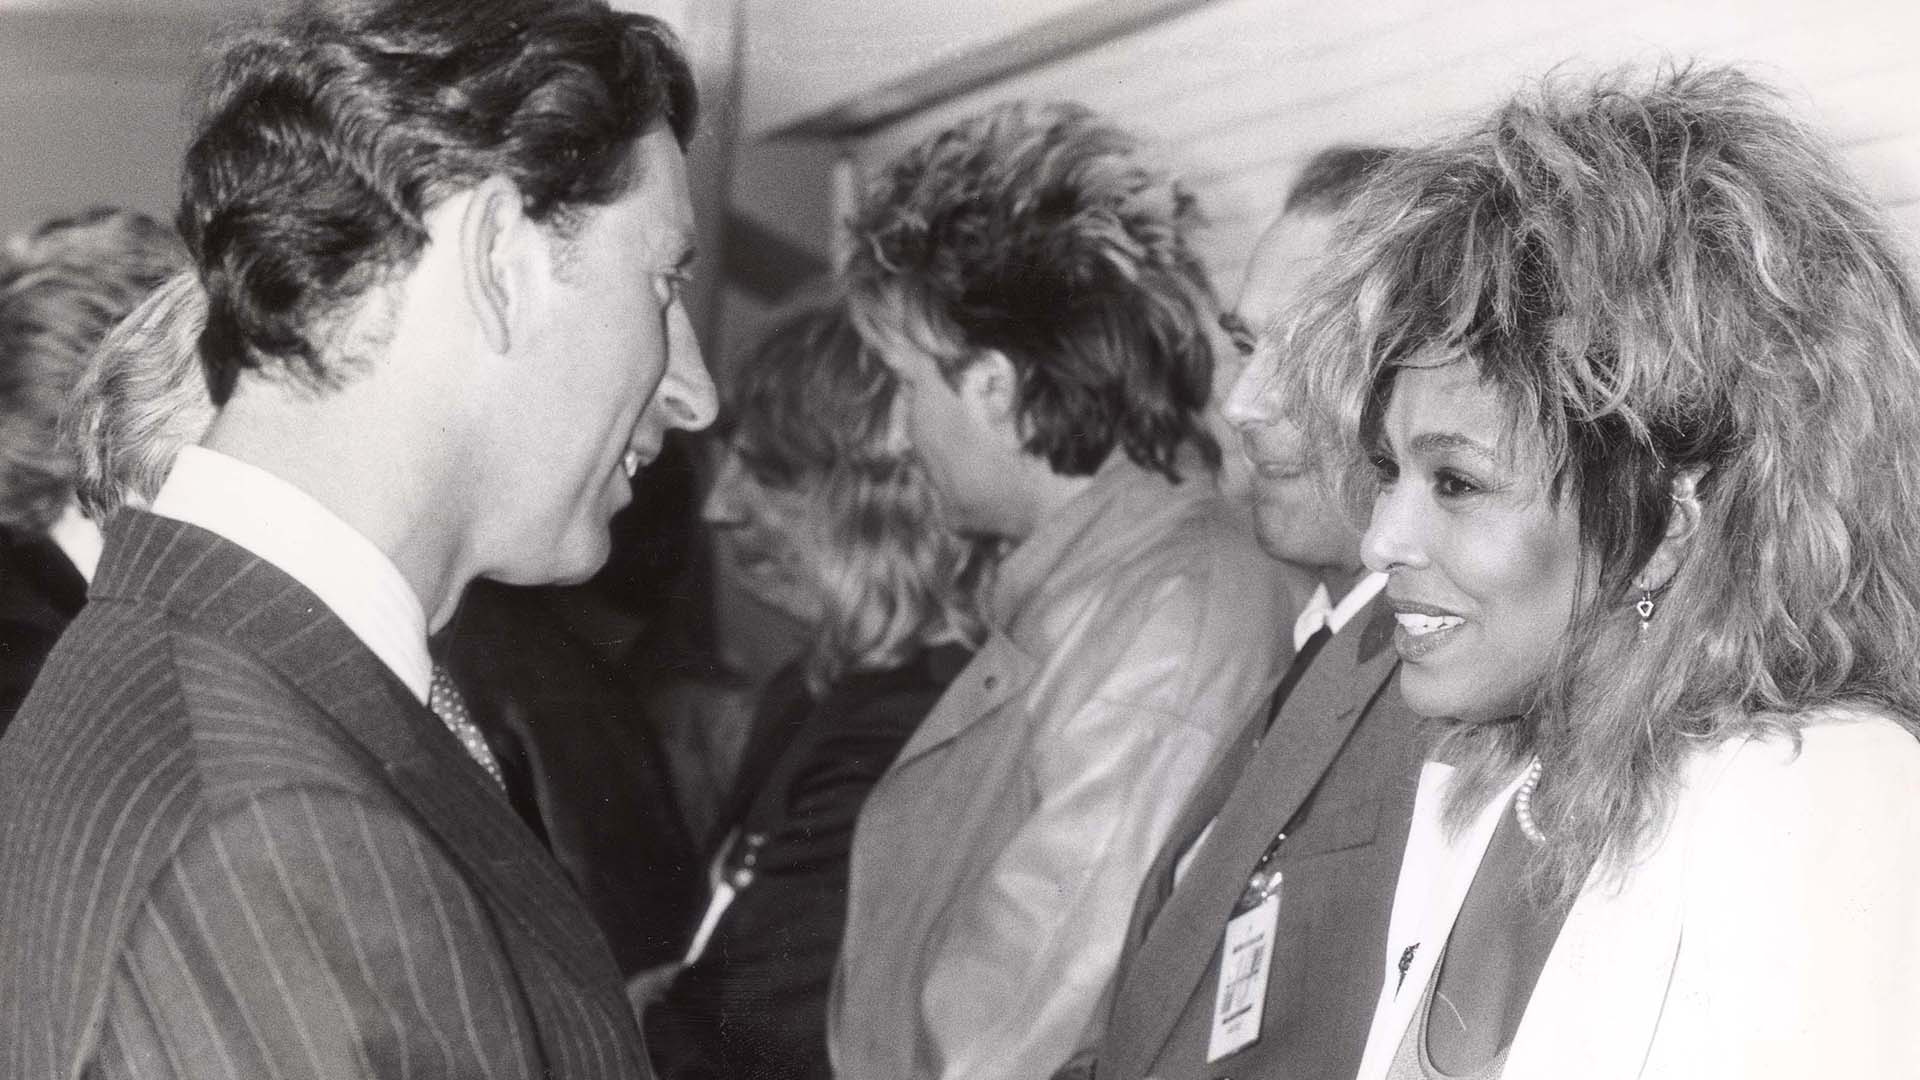 Prince Of Wales - 20th June 1986 Hrh Prince Charles At The Princes Trust Birthday Party At Wembley When He Met Many Of The Leading Stars Of The Pop And Entertainment World. He Is Pictured Talking With Tina Turner.